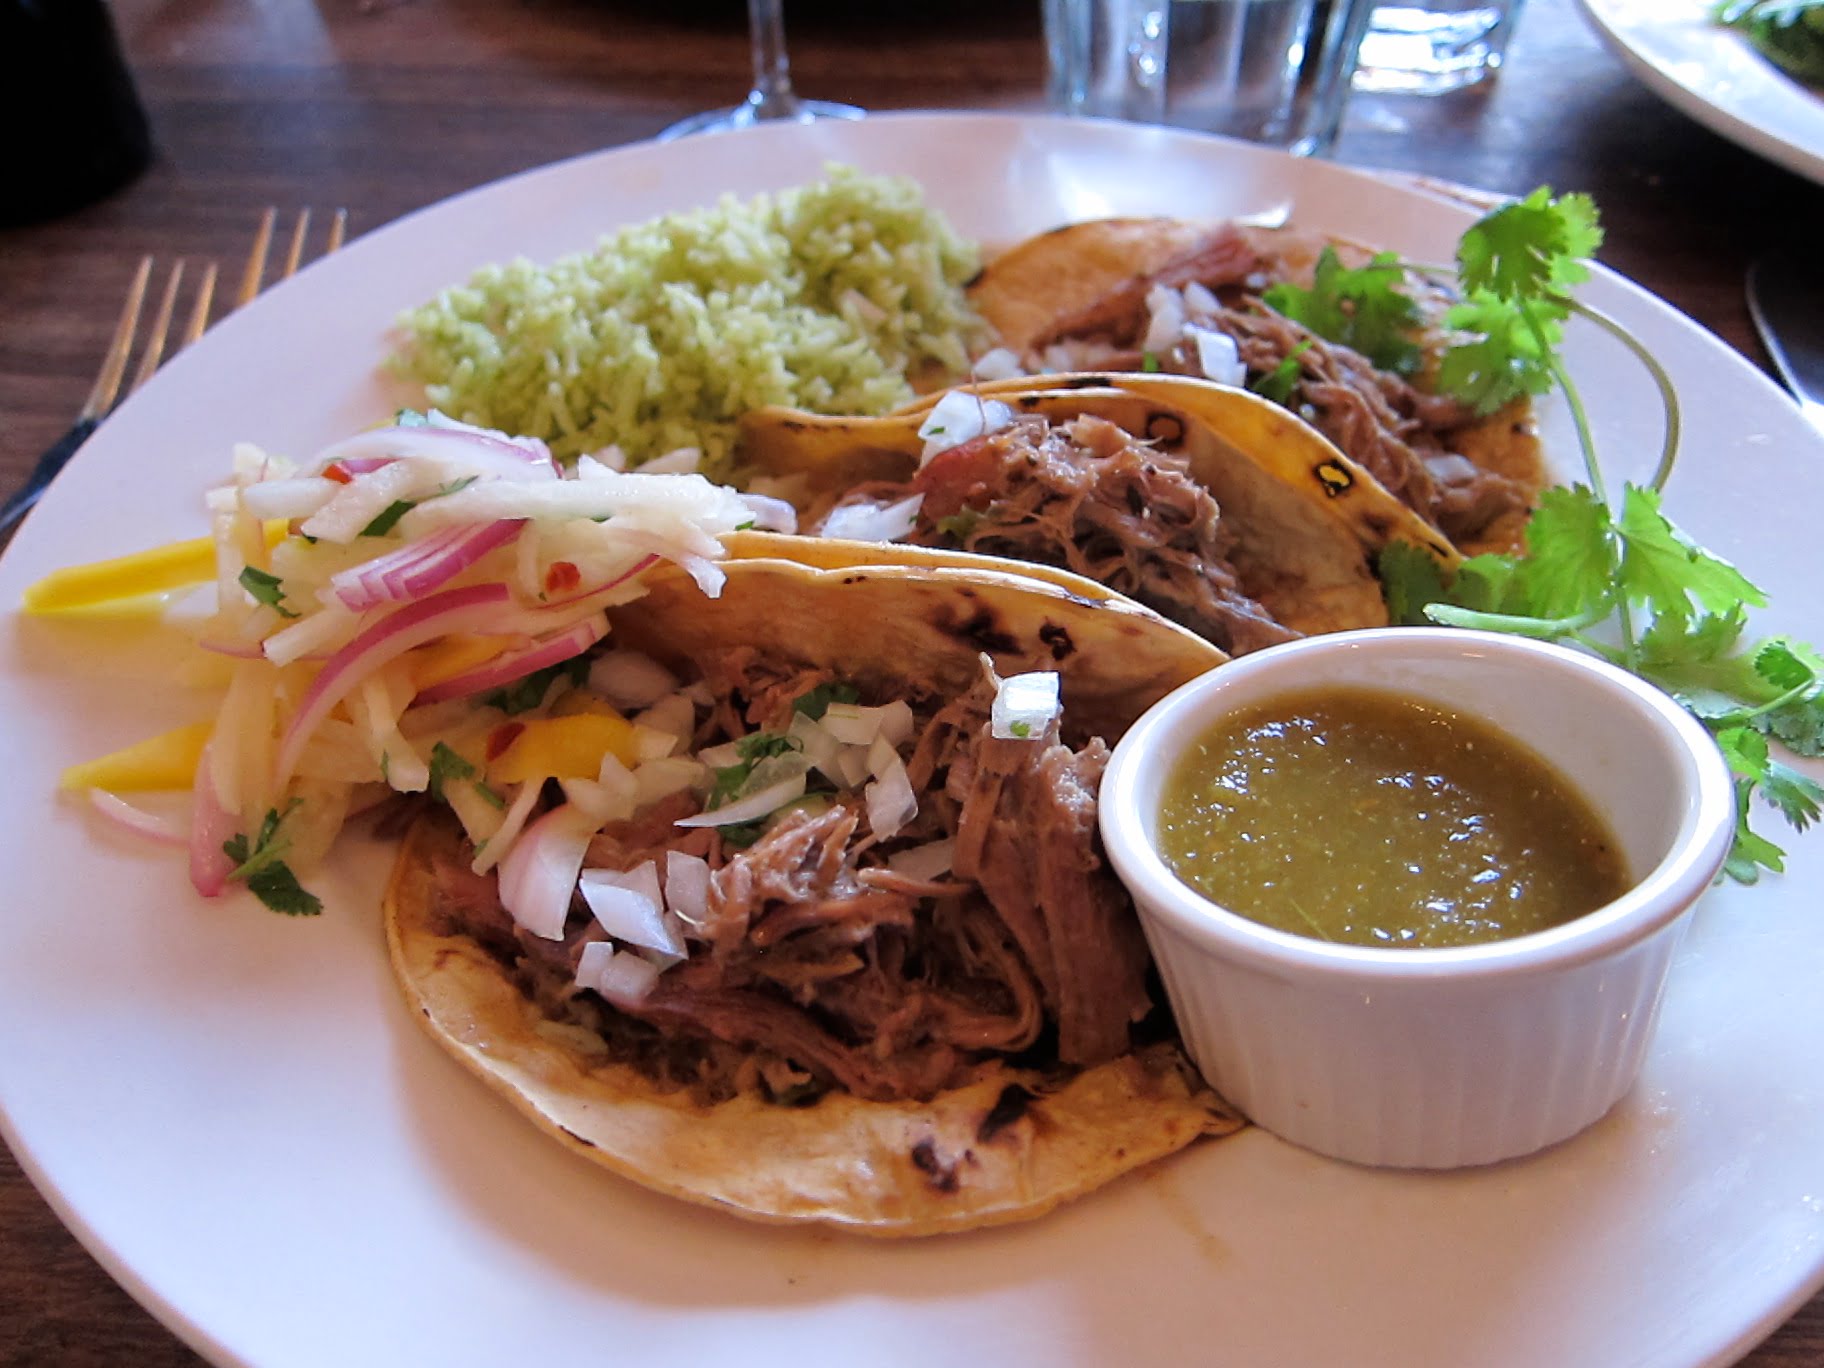 Roasted lamb meat in Taco served with vegetable salad